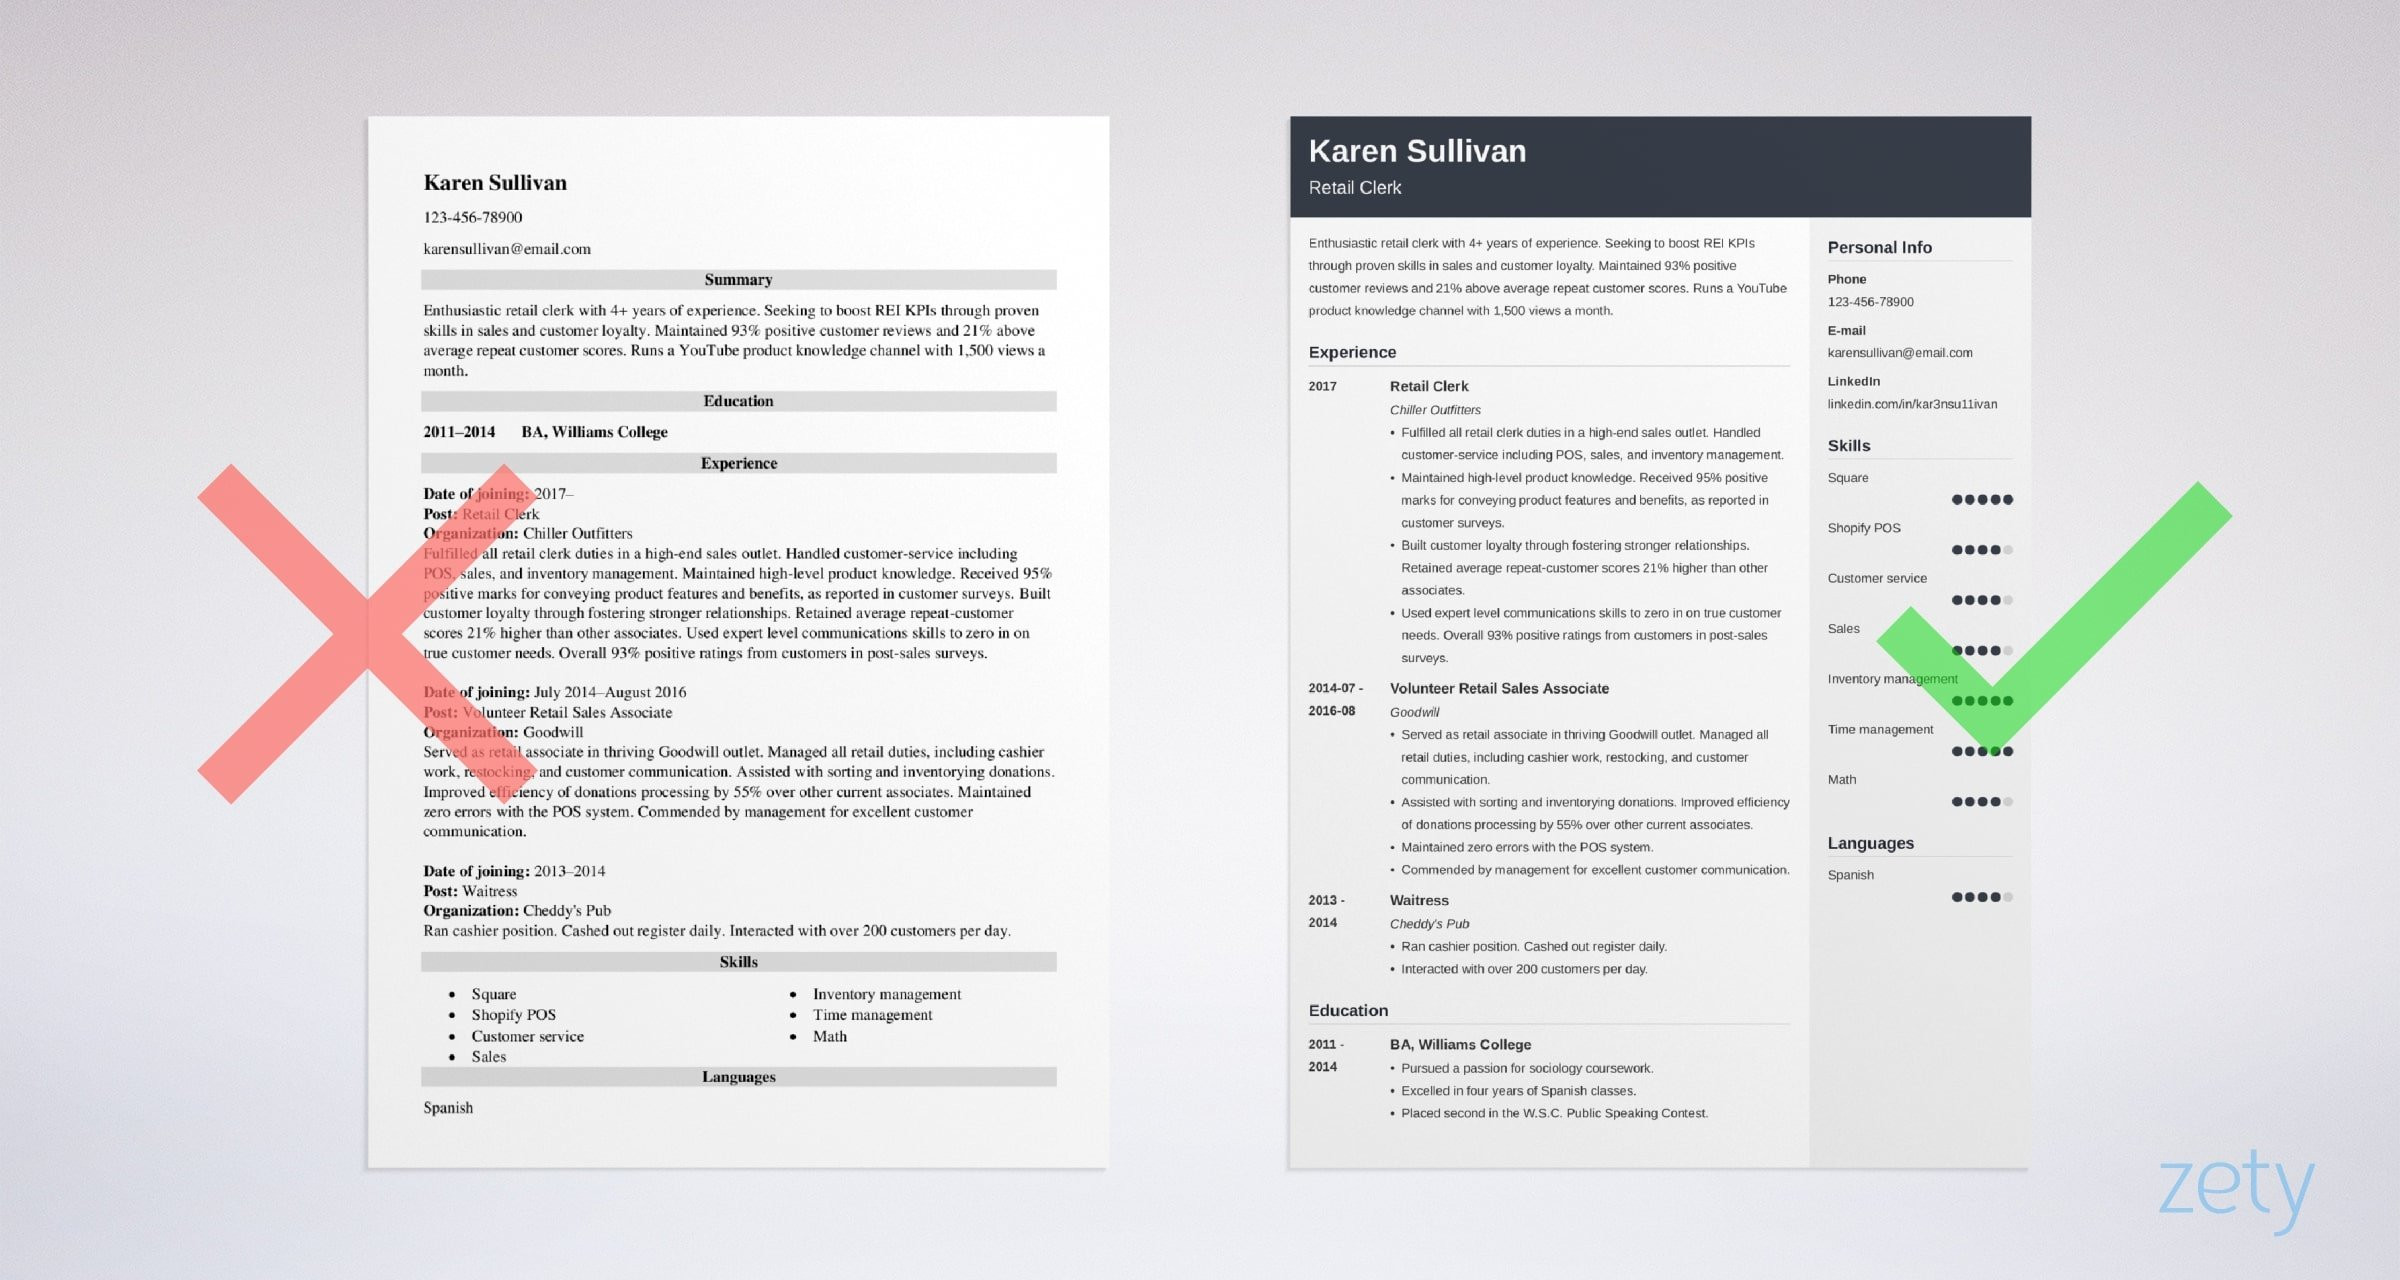 Overview Sample for Resume On Retail Retail Resume Examples (with Skills & Experience)